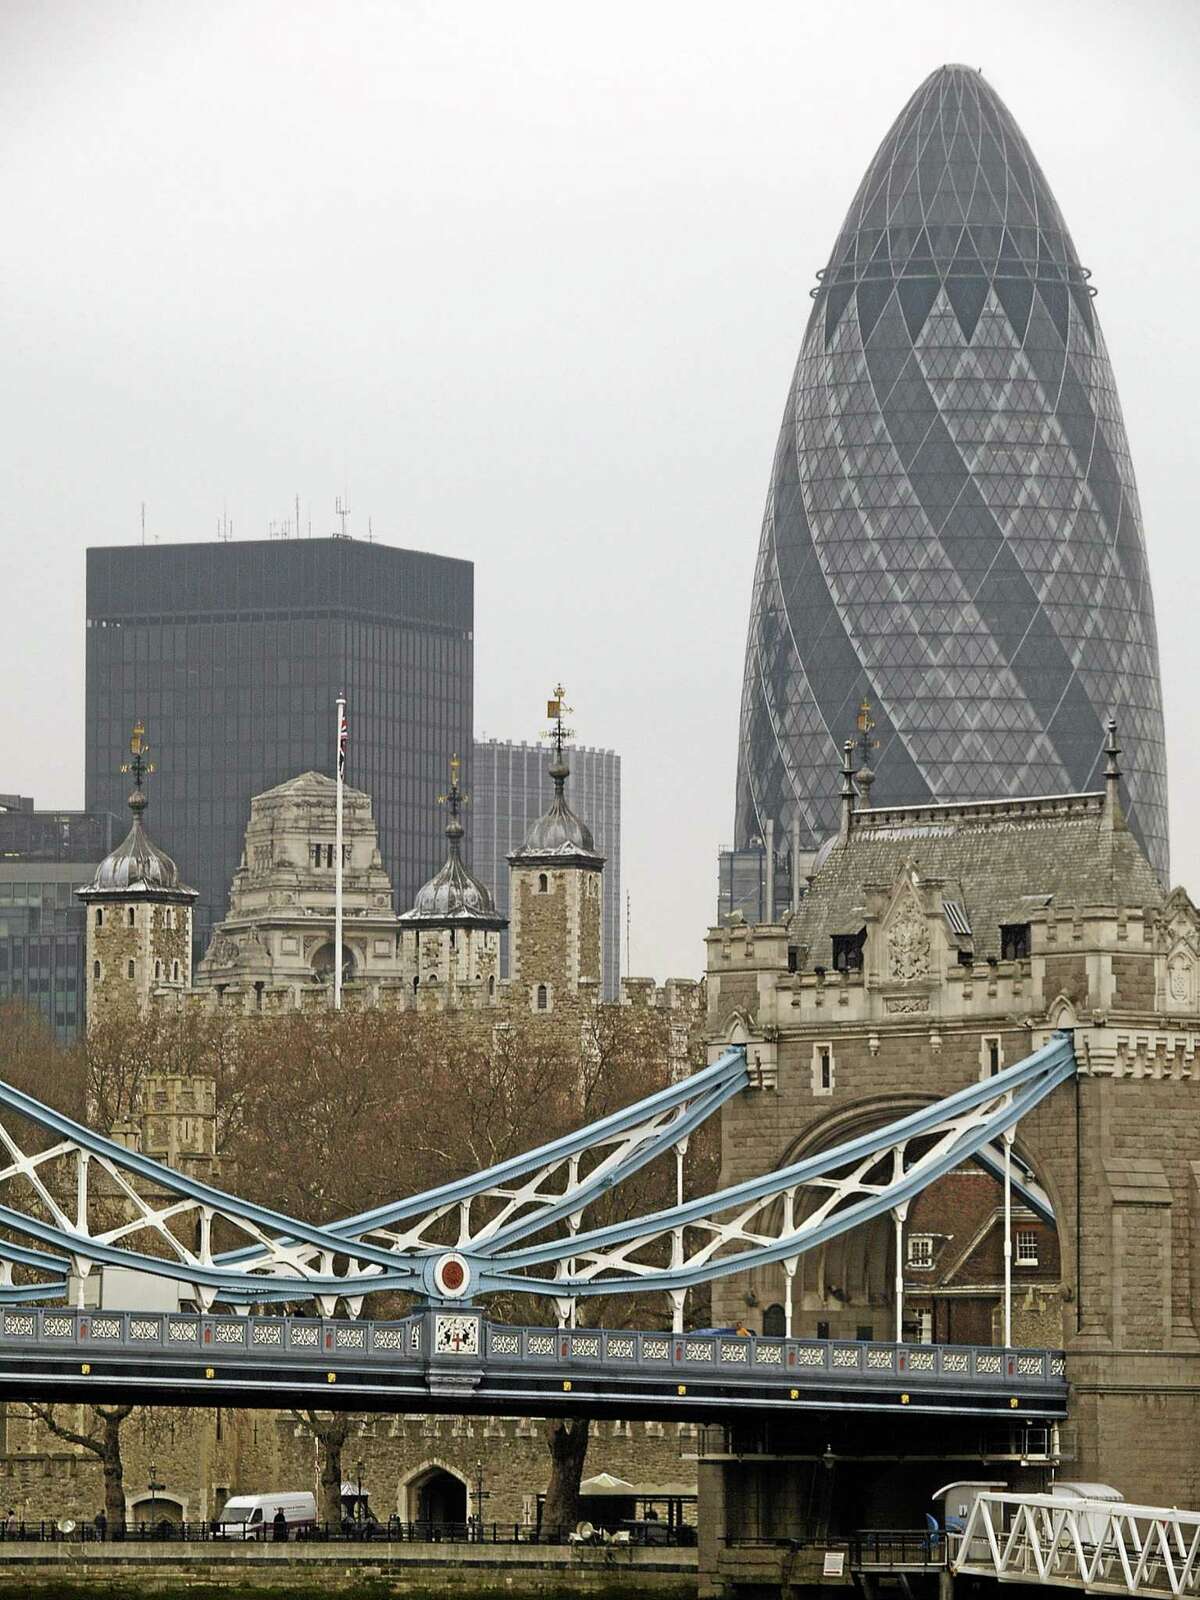 FILE - This Monday Feb. 5, 2007 file photo shows the Gherkin over London's Tower Bridge, and the Tower of London. One of Londonís most iconic office buildings has been put up for sale. The Norman Foster-designed tower, nicknamed The Gherkin for its distinctive pickle-like shape, was put into bankruptcy protection last year. Deloitte Real Estate and Savills expect interest in the building to come from all over the globe. (AP Photo/Max Nash, File)